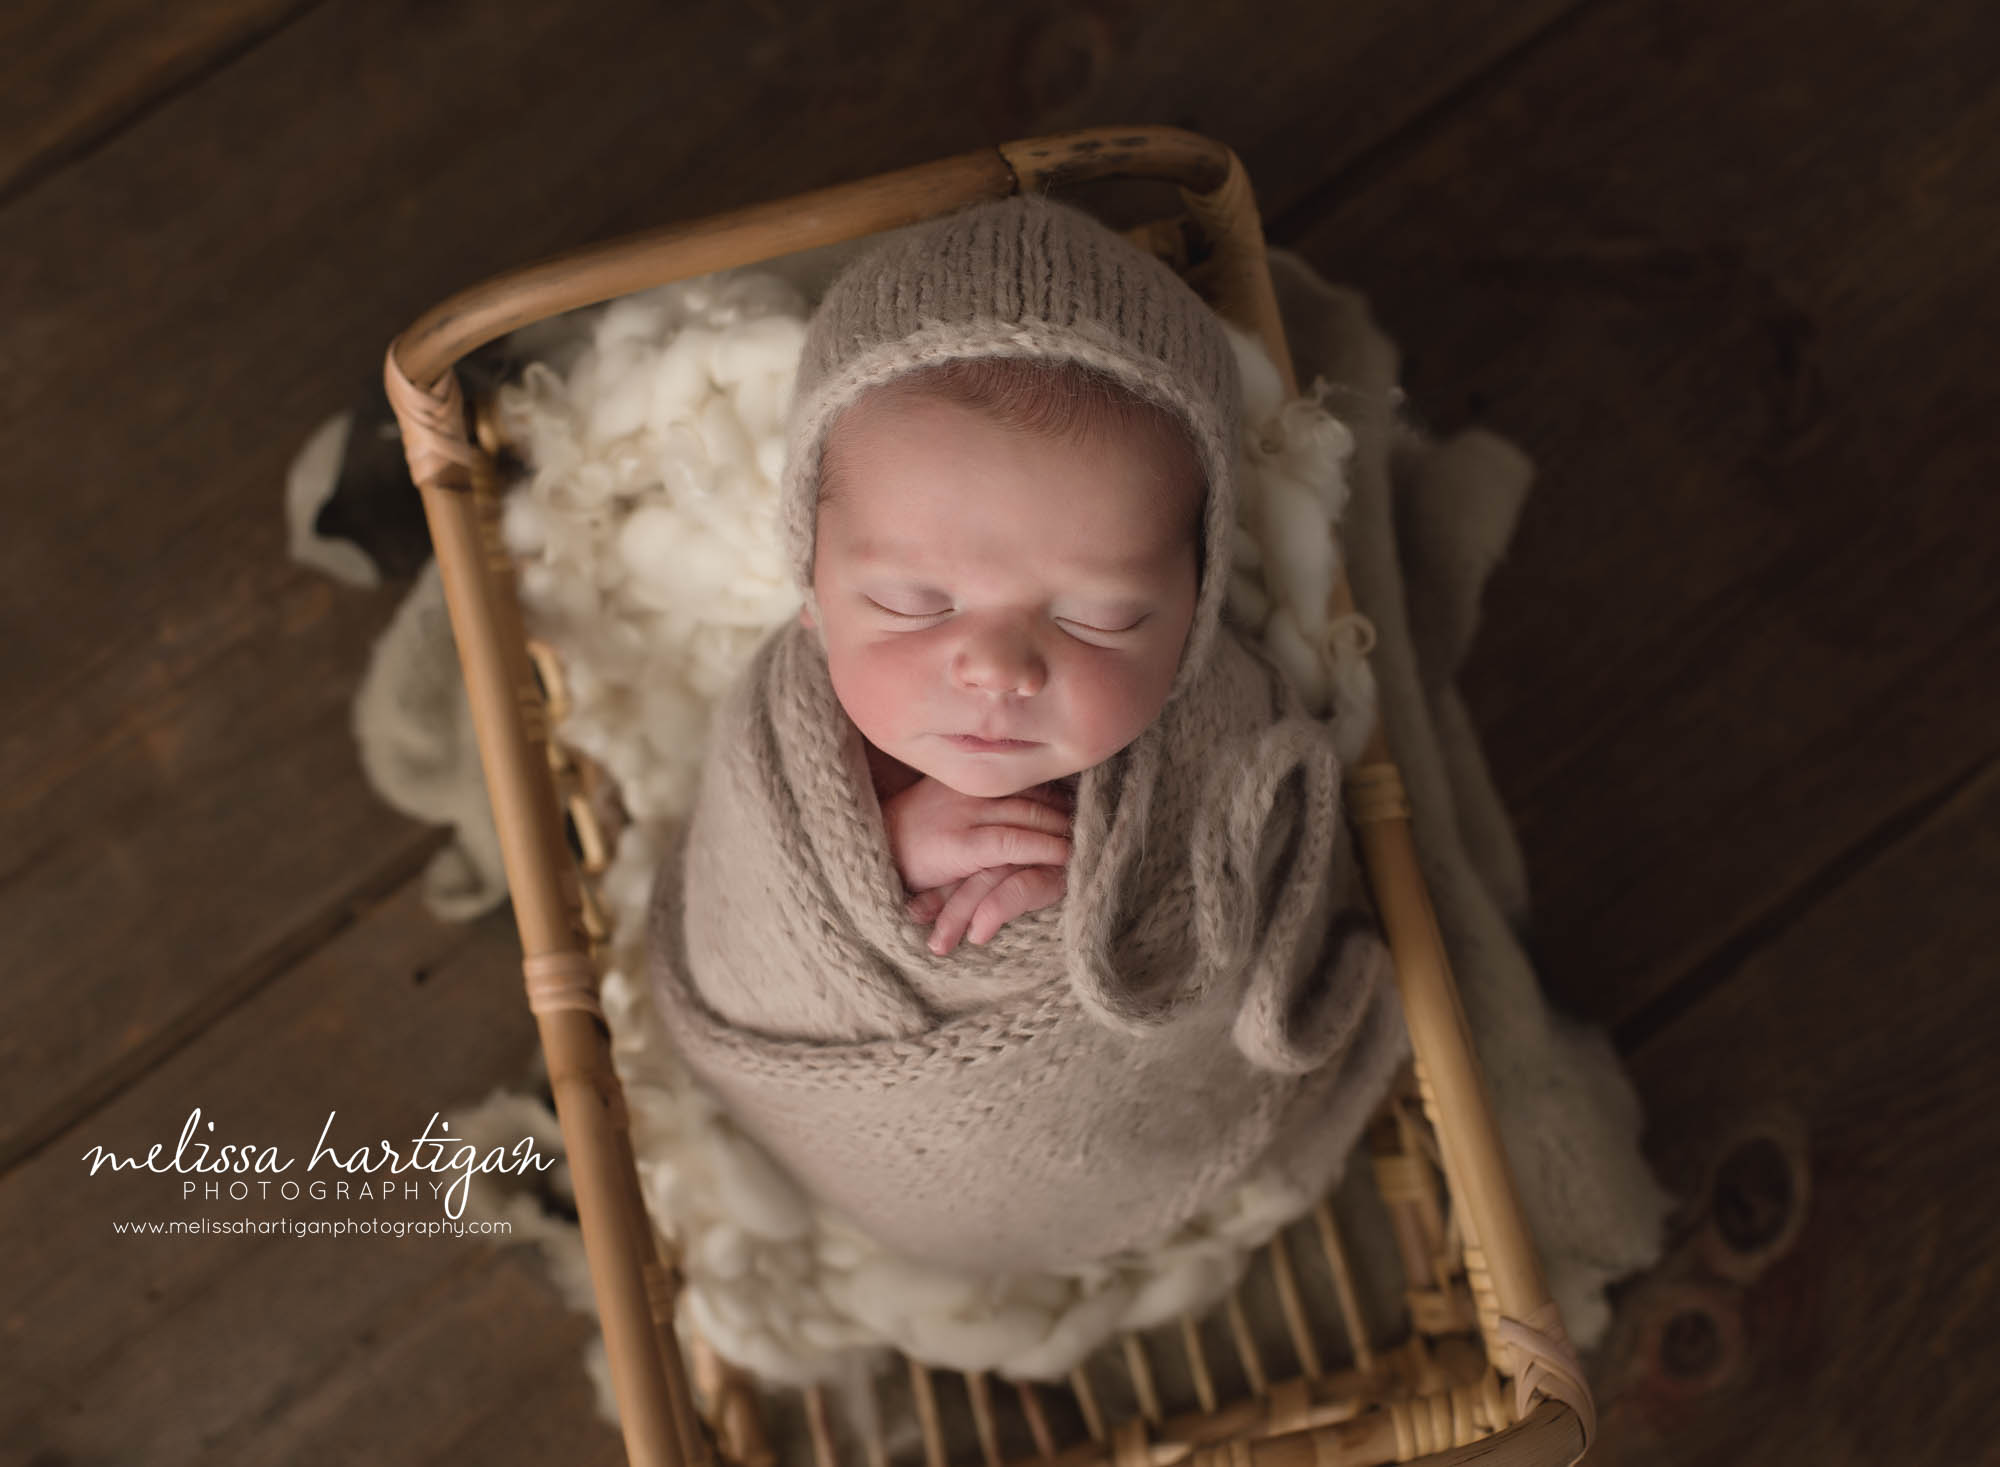 newborn baby boy wrapped in knitted wrap wearing matching bonnet posed in basket